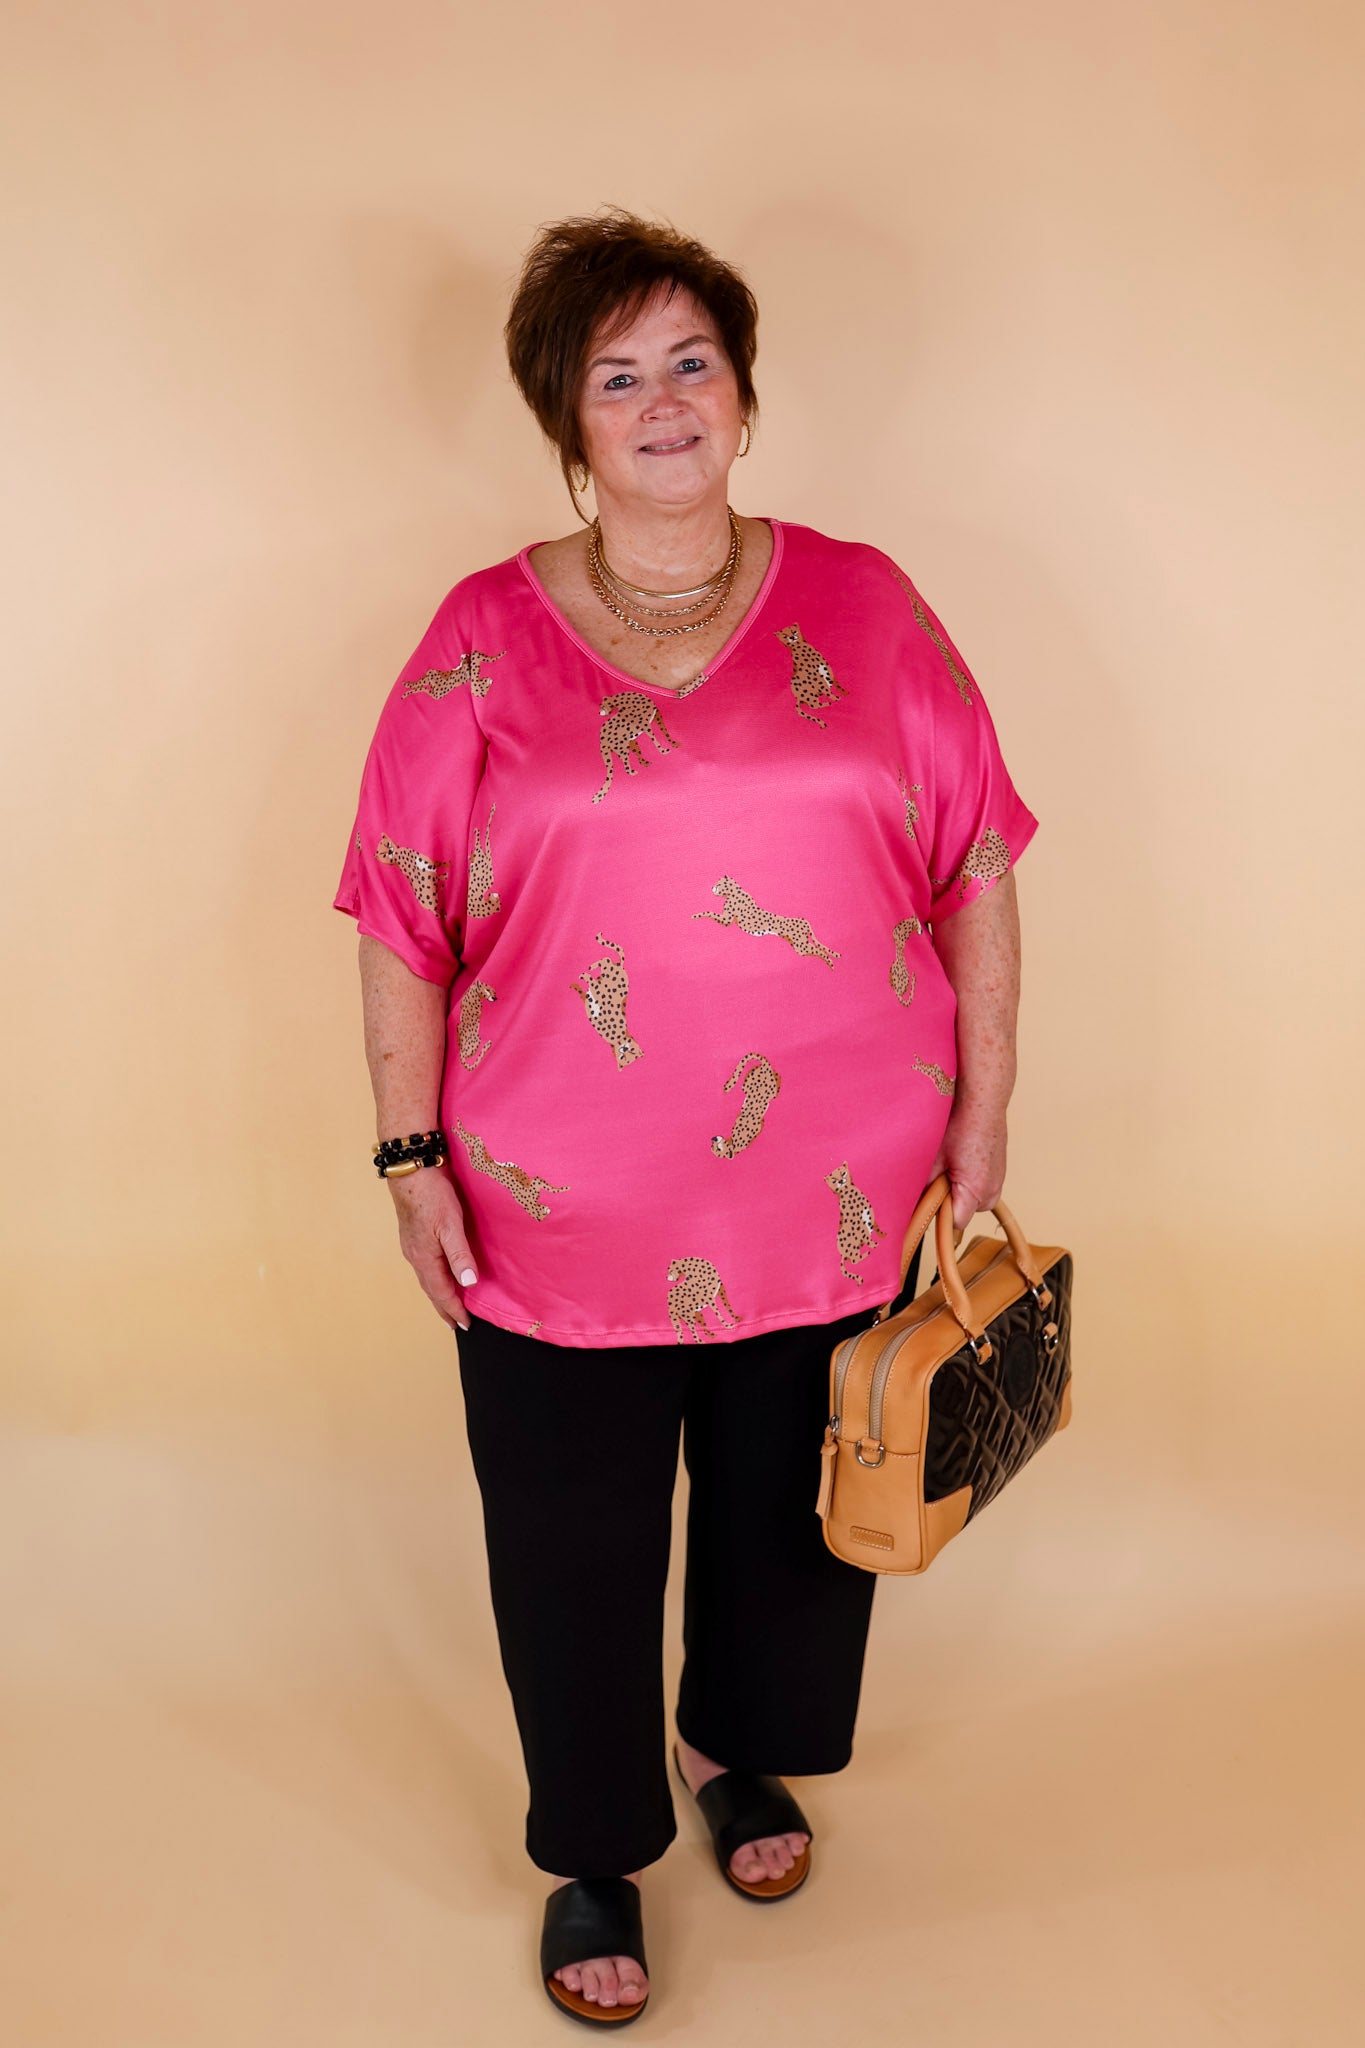 Wild Side Cheetah Print V Neck Top with Short Sleeves in Hot Pink - Giddy Up Glamour Boutique